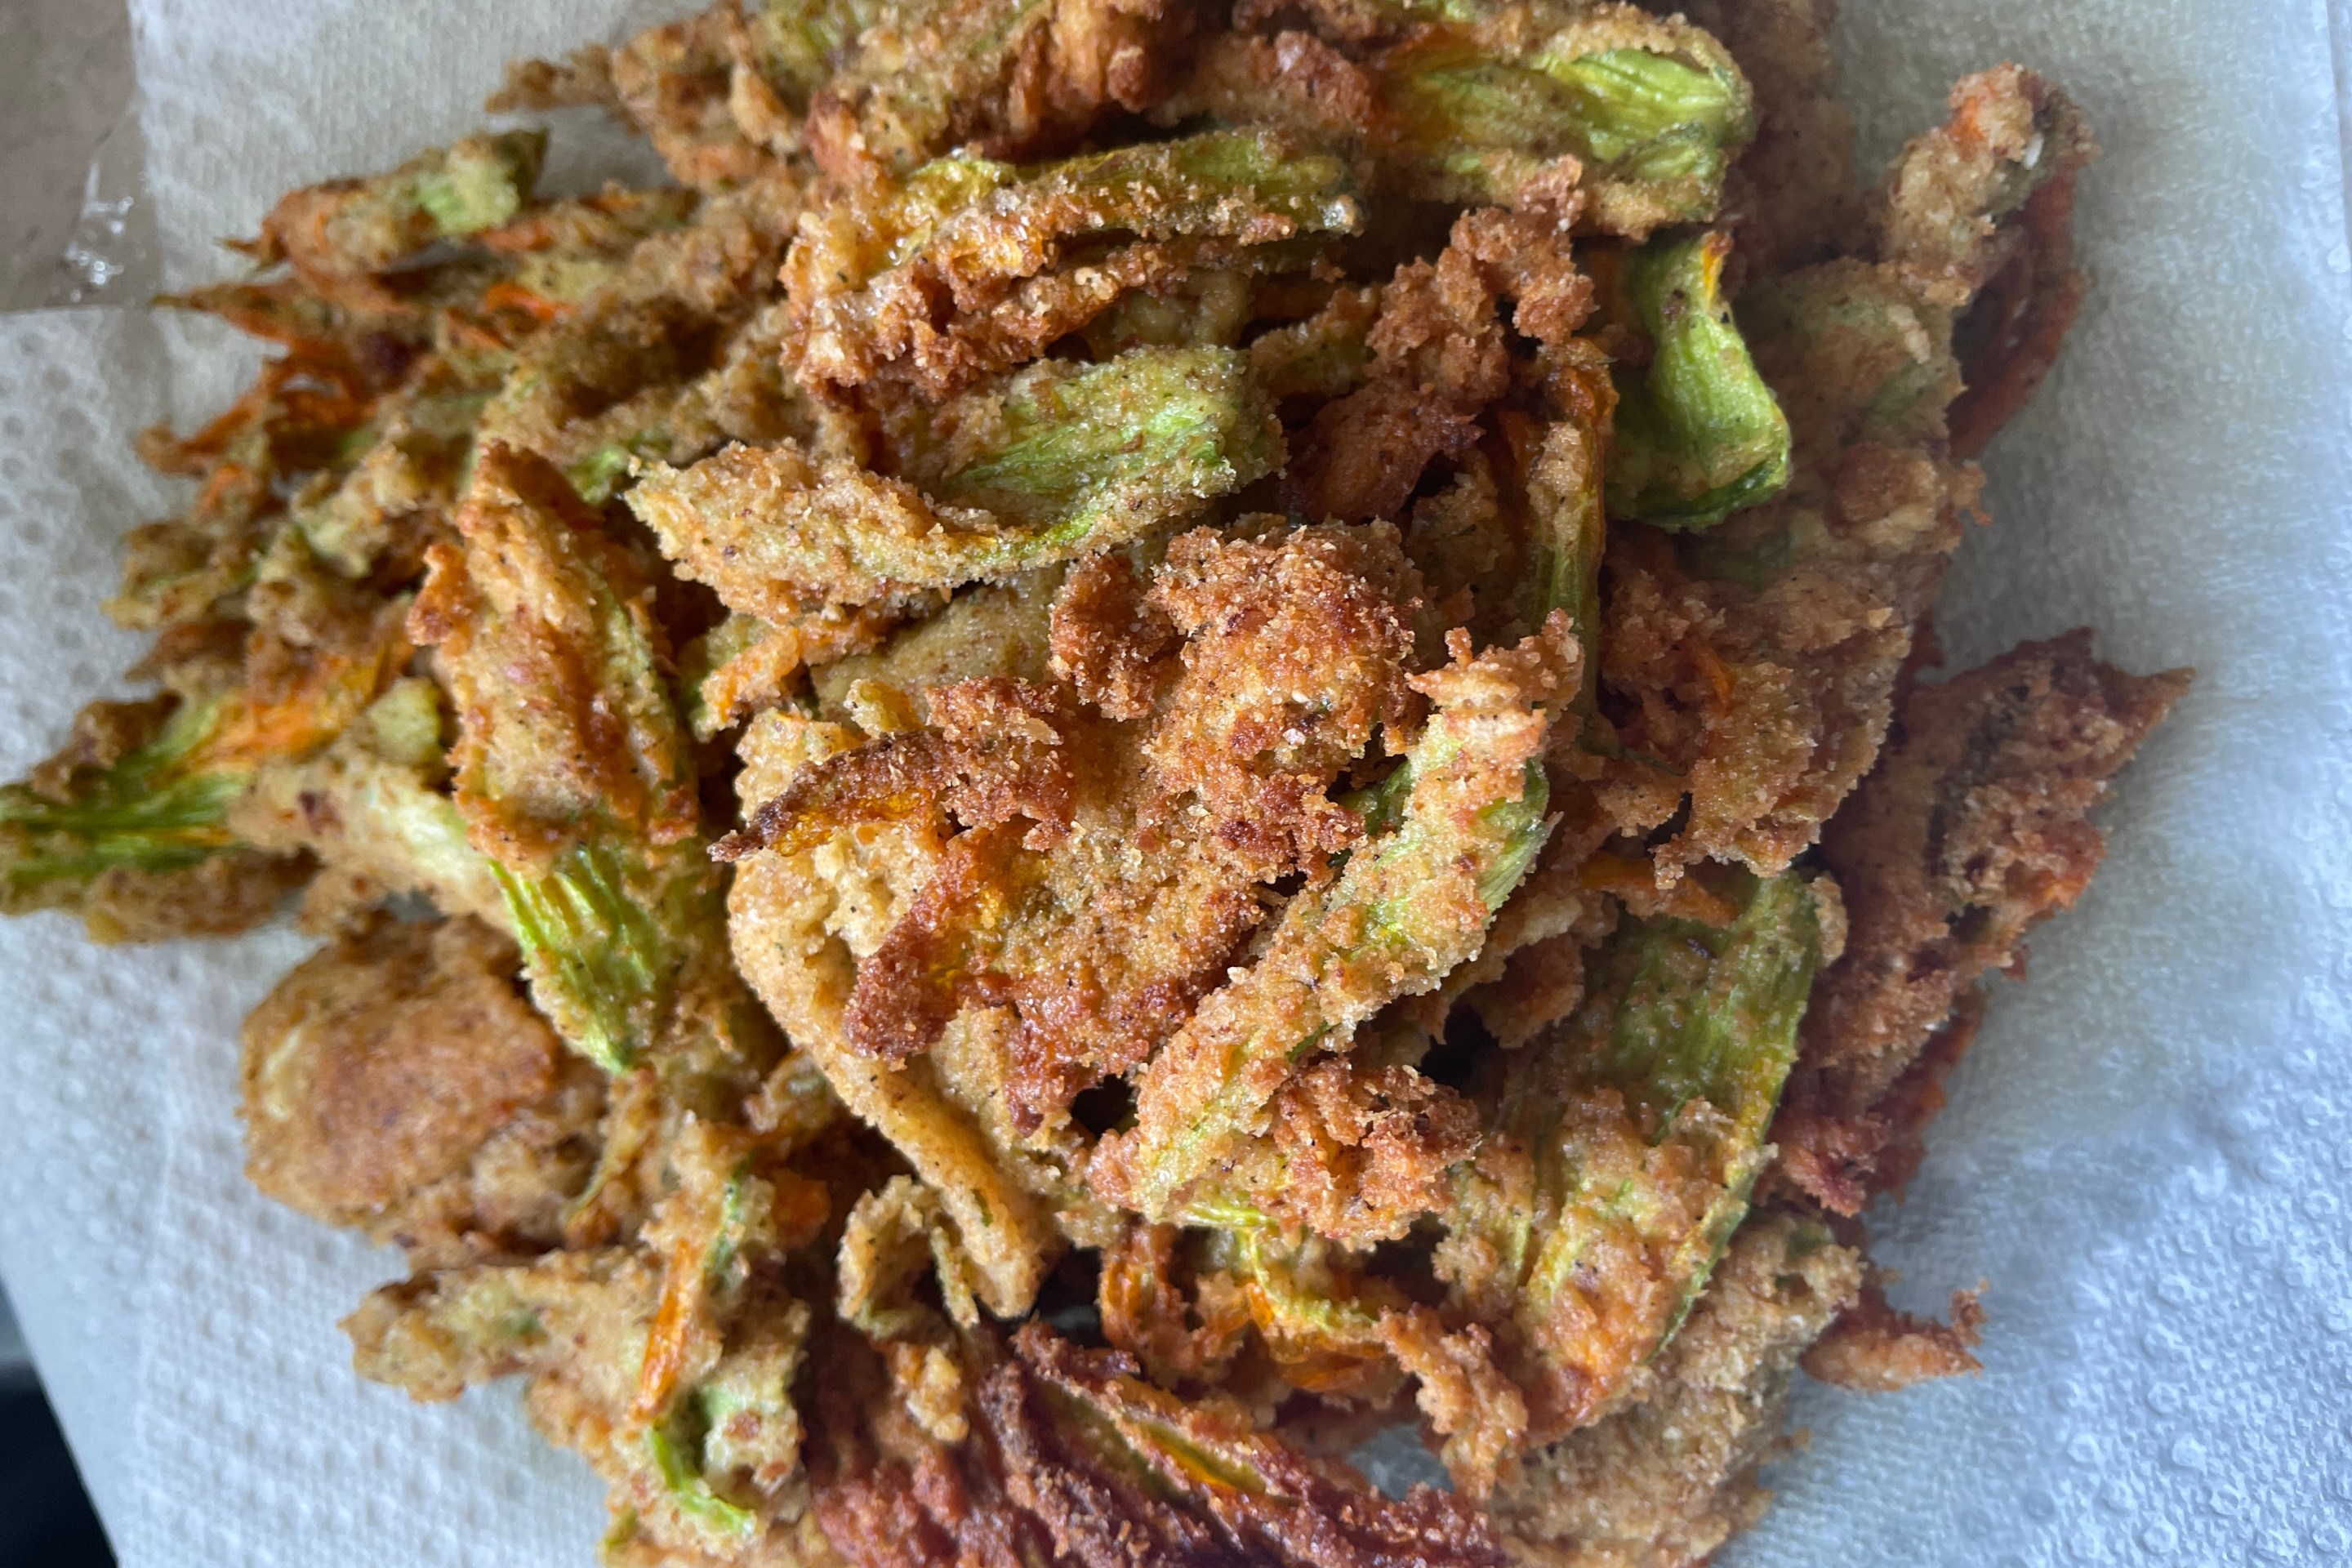 A picture of fried zucchini flowers.